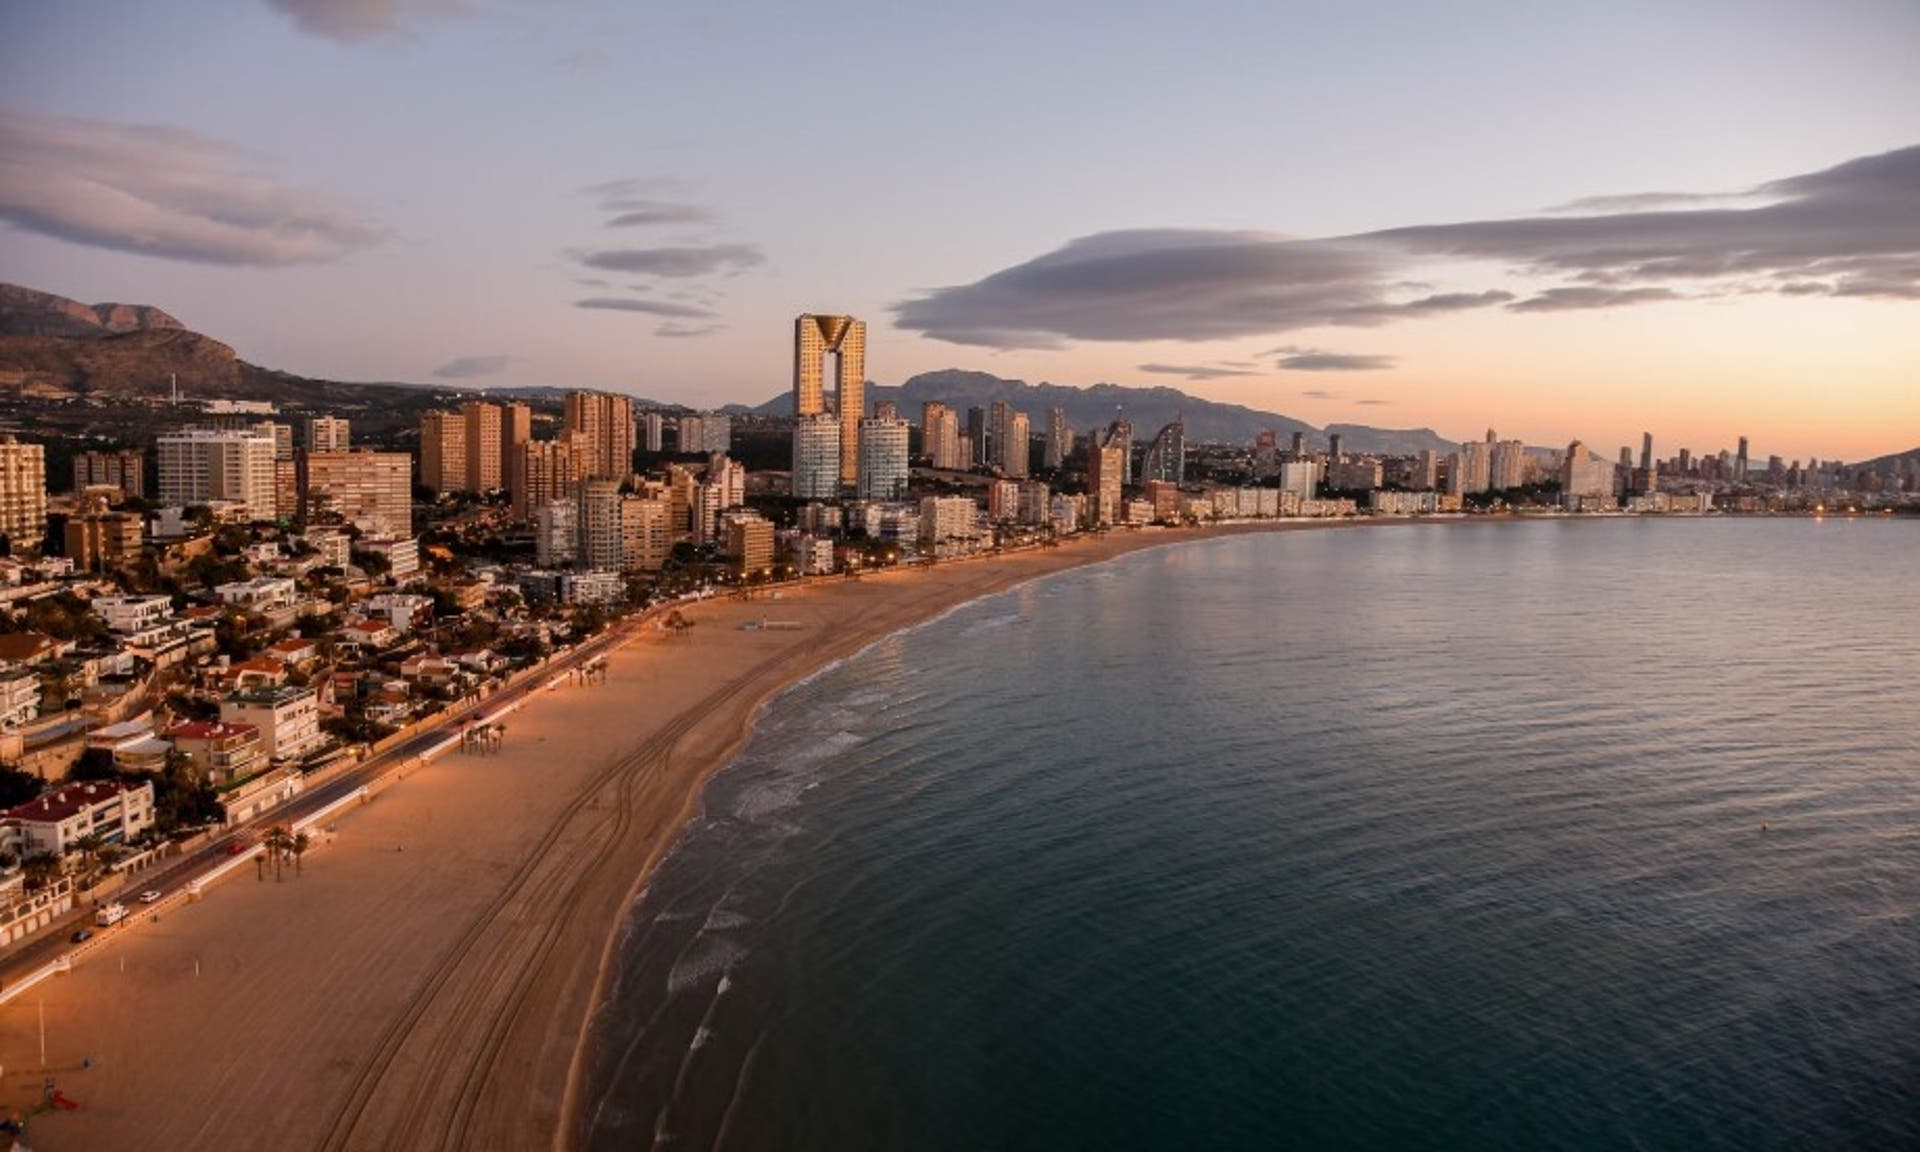  Aerial view of the Benidorm coastline on a sunny evening 